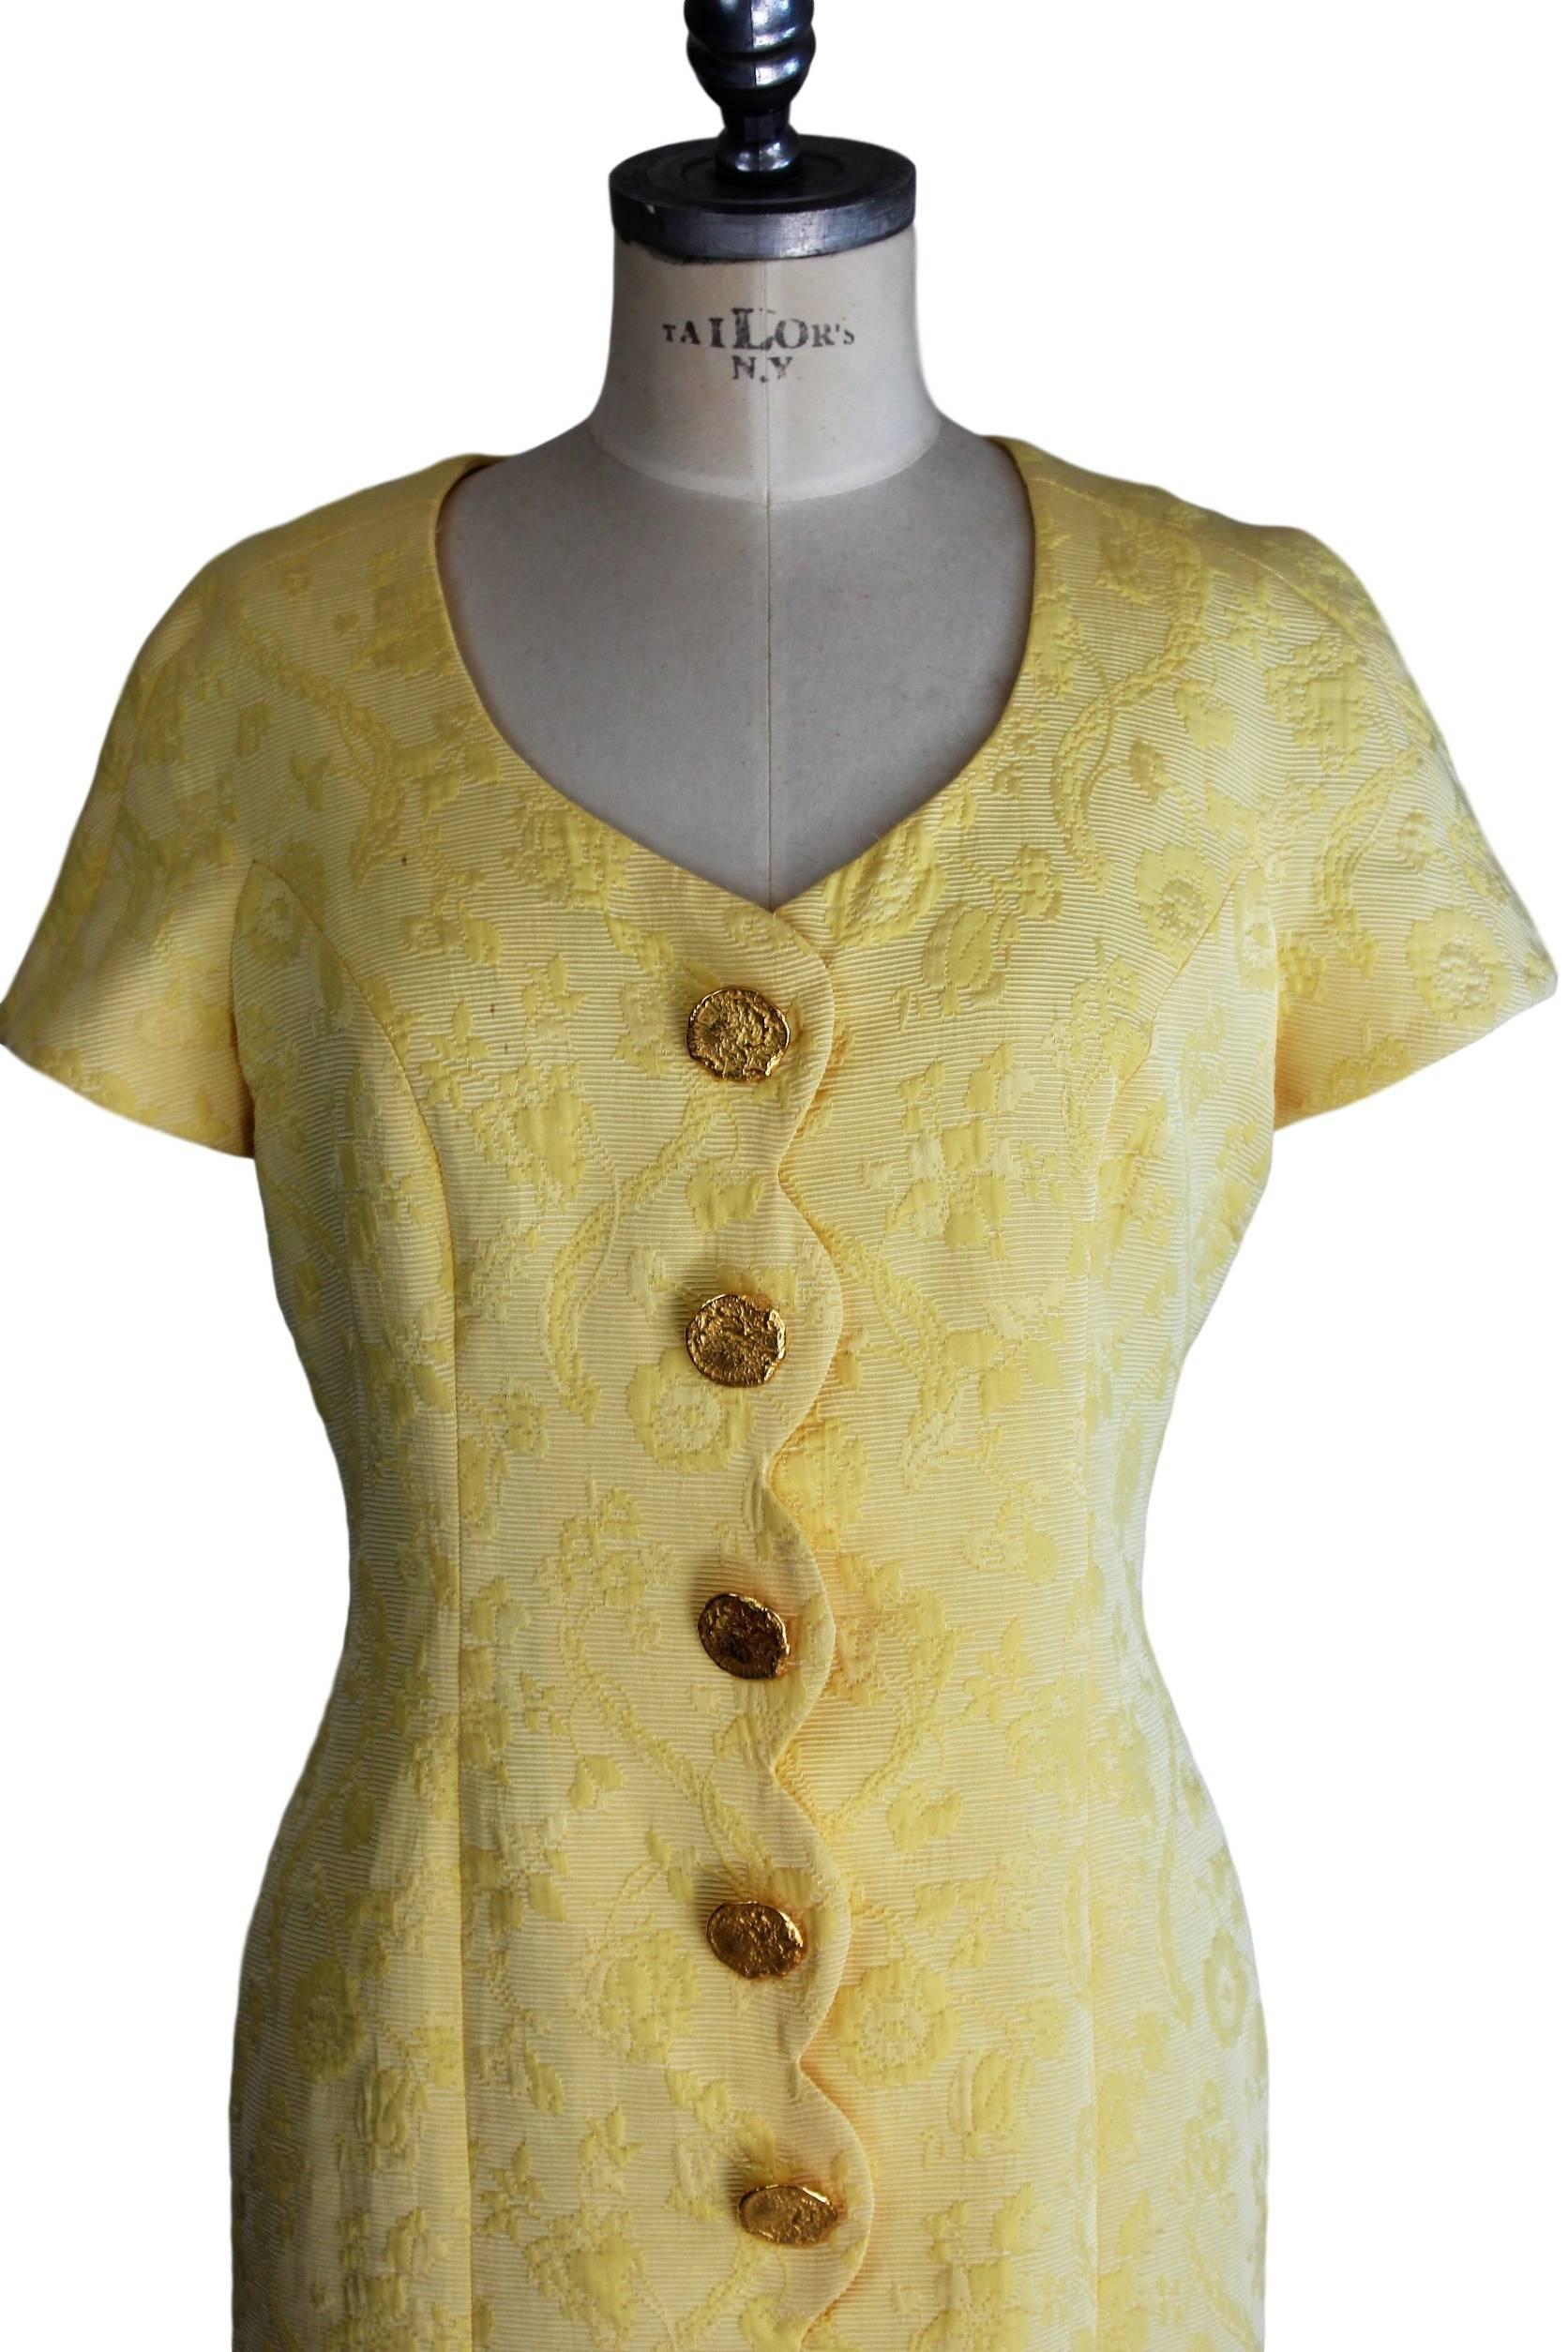 1970s Frank Usher Yellow Cotton Blend Tunic Dress Floral Embossed  For Sale 1